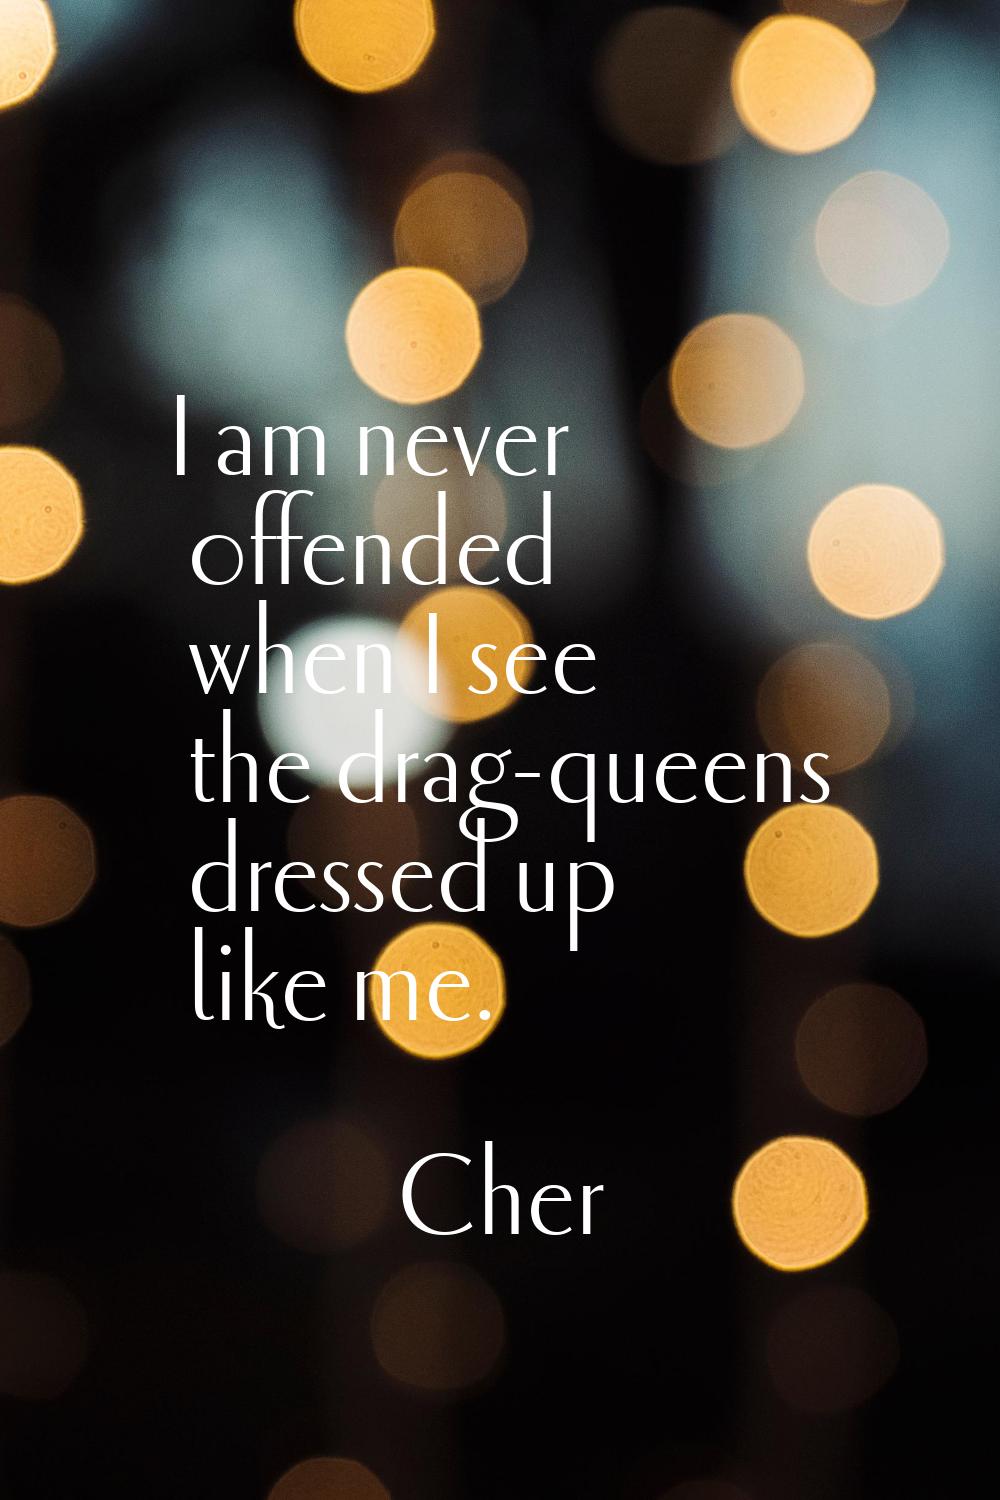 I am never offended when I see the drag-queens dressed up like me.